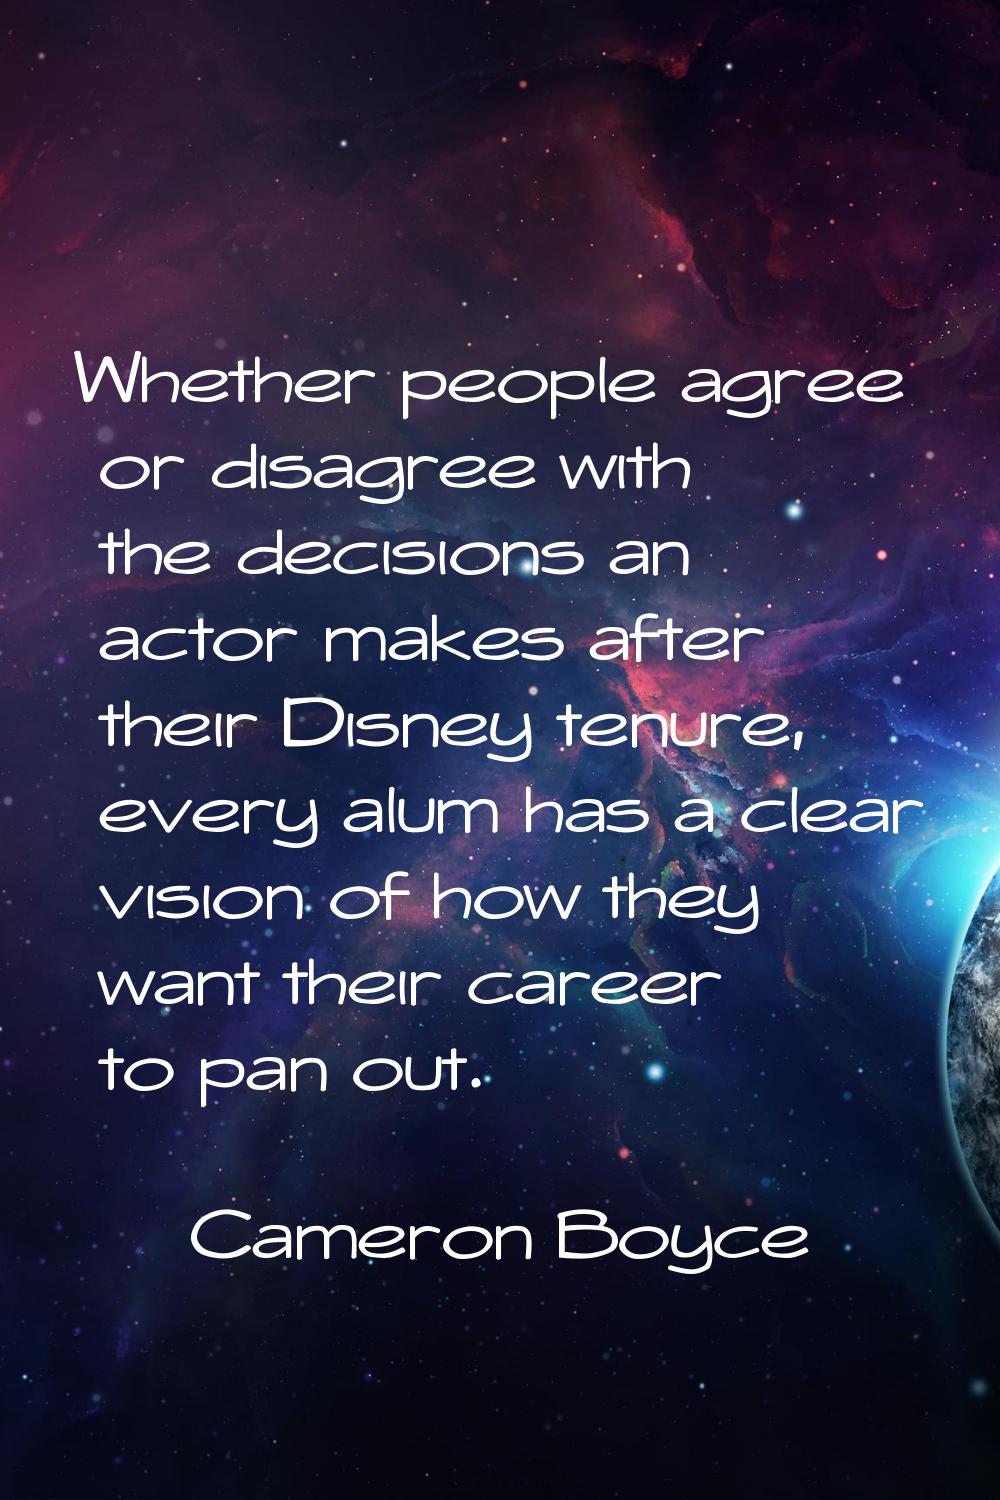 Whether people agree or disagree with the decisions an actor makes after their Disney tenure, every